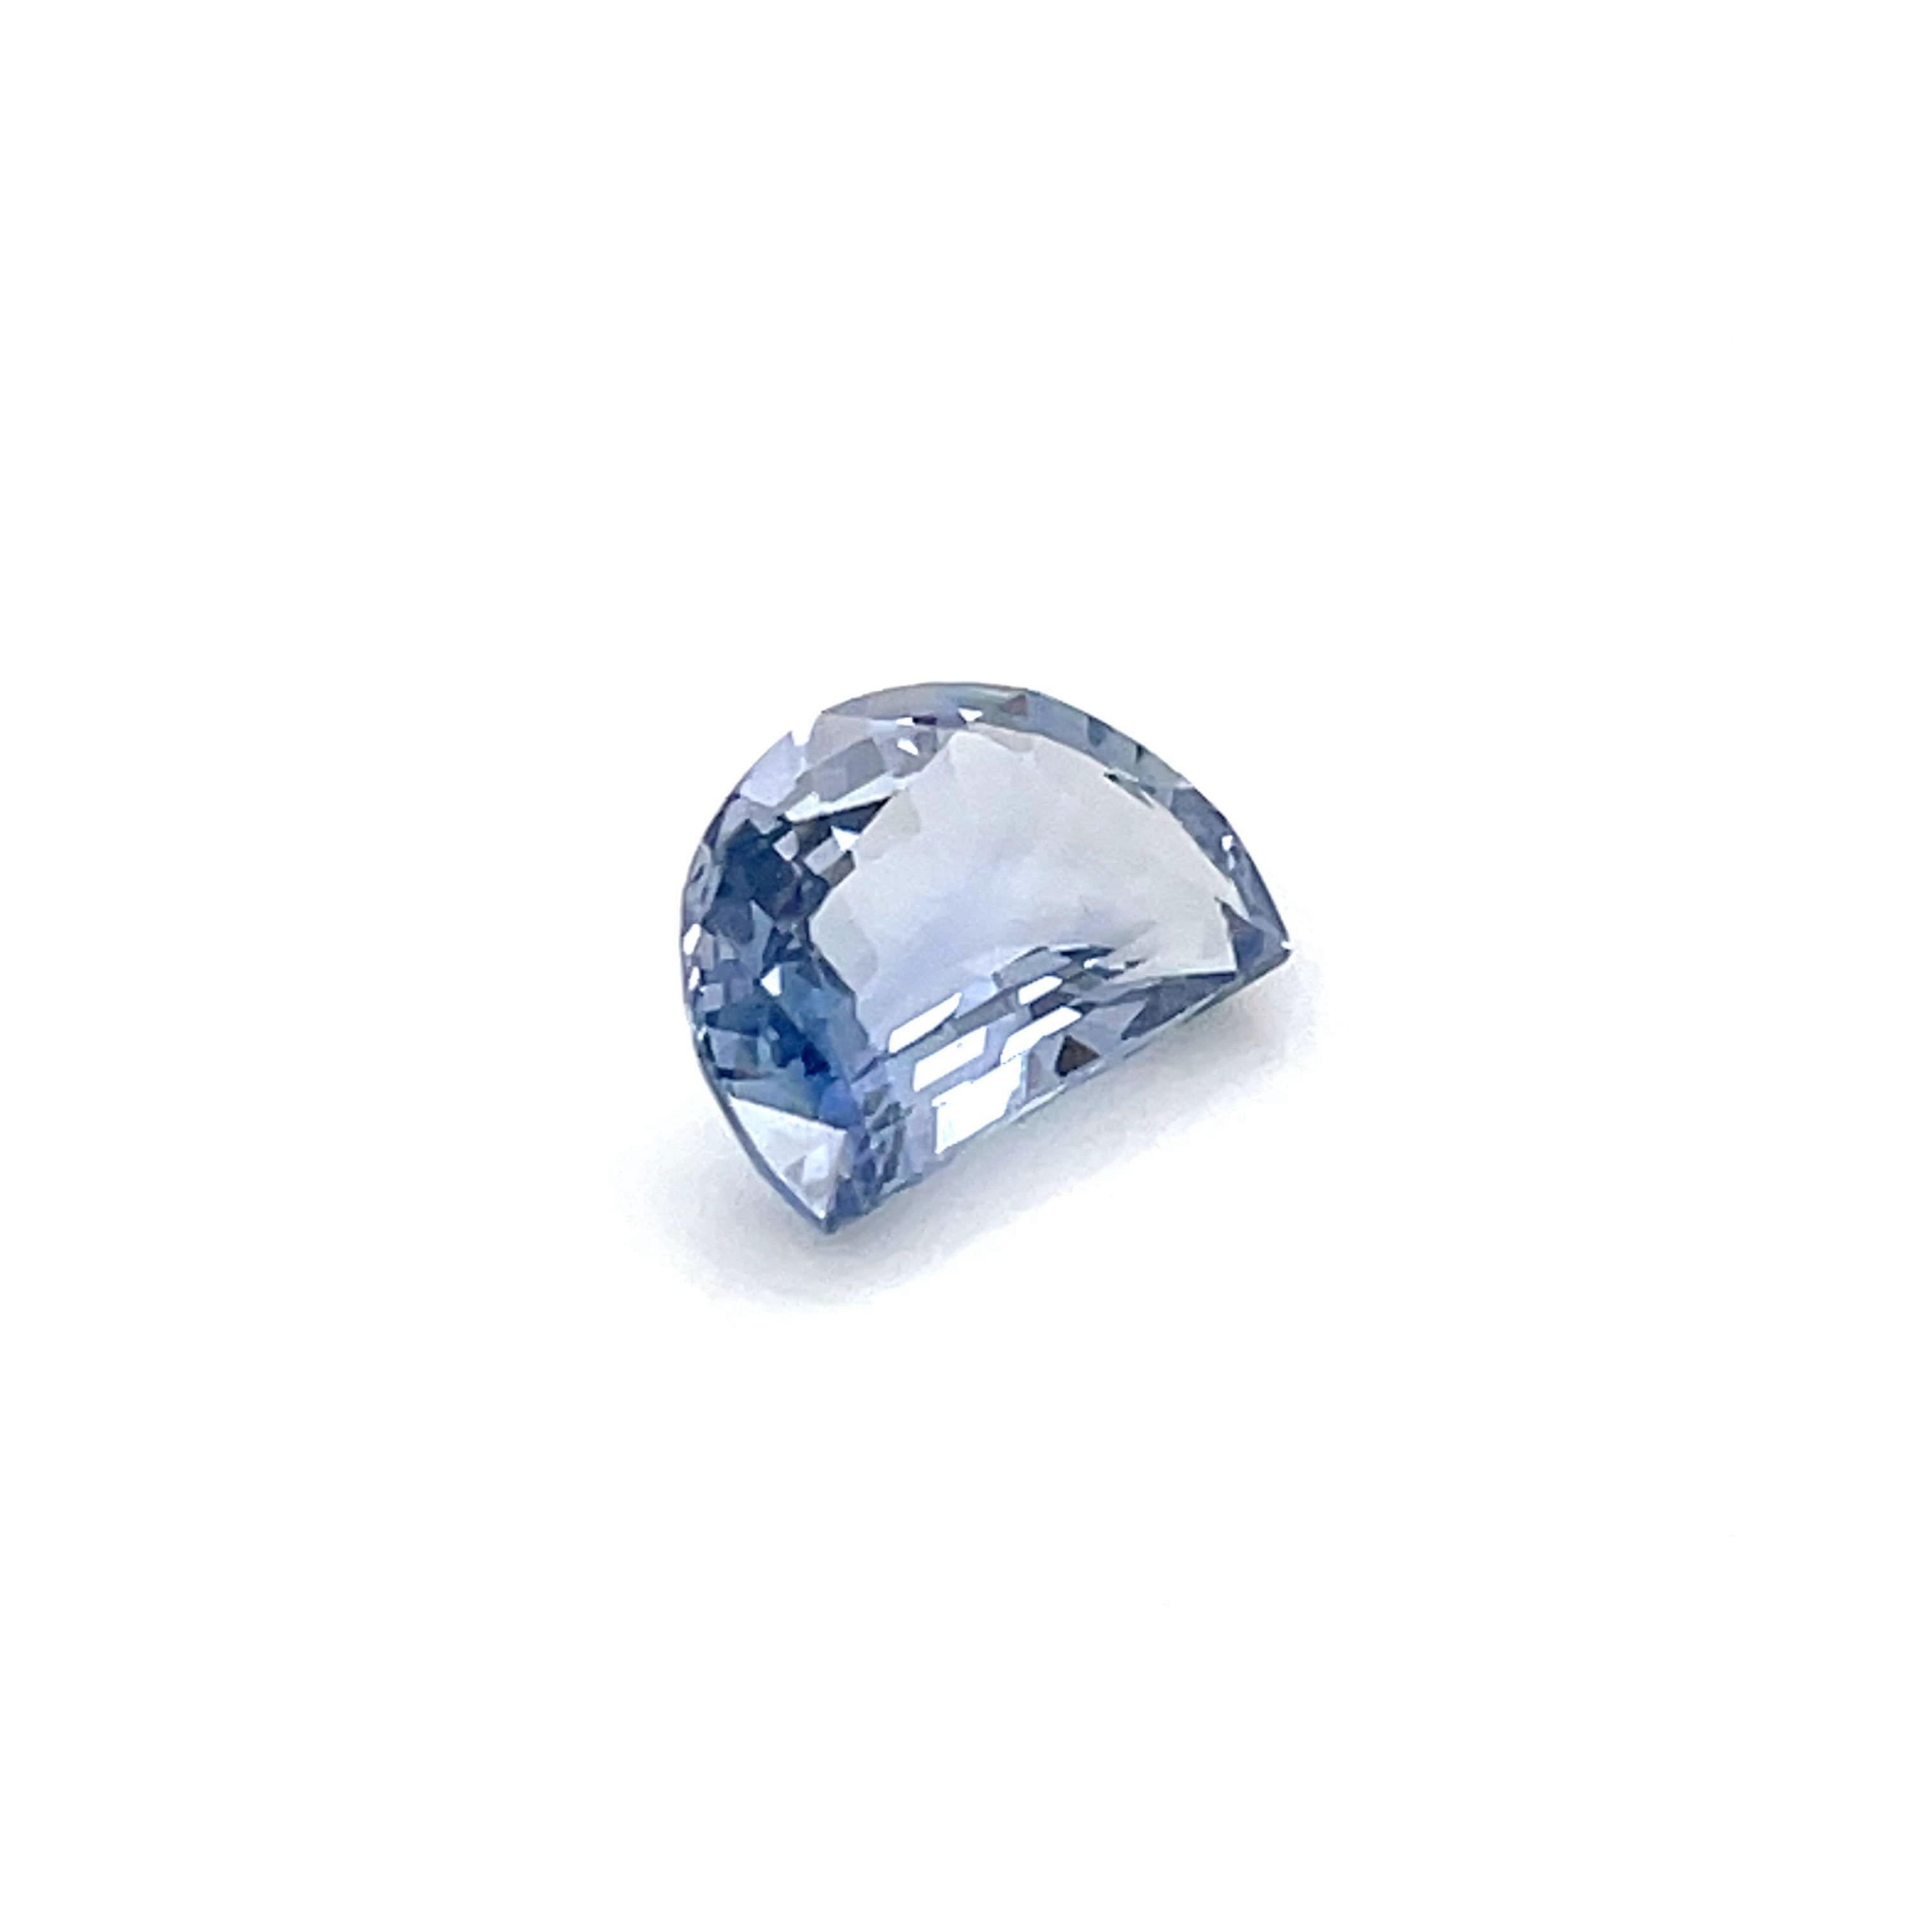 Half-Moon Sapphire 4.19 Cts For Sale 1